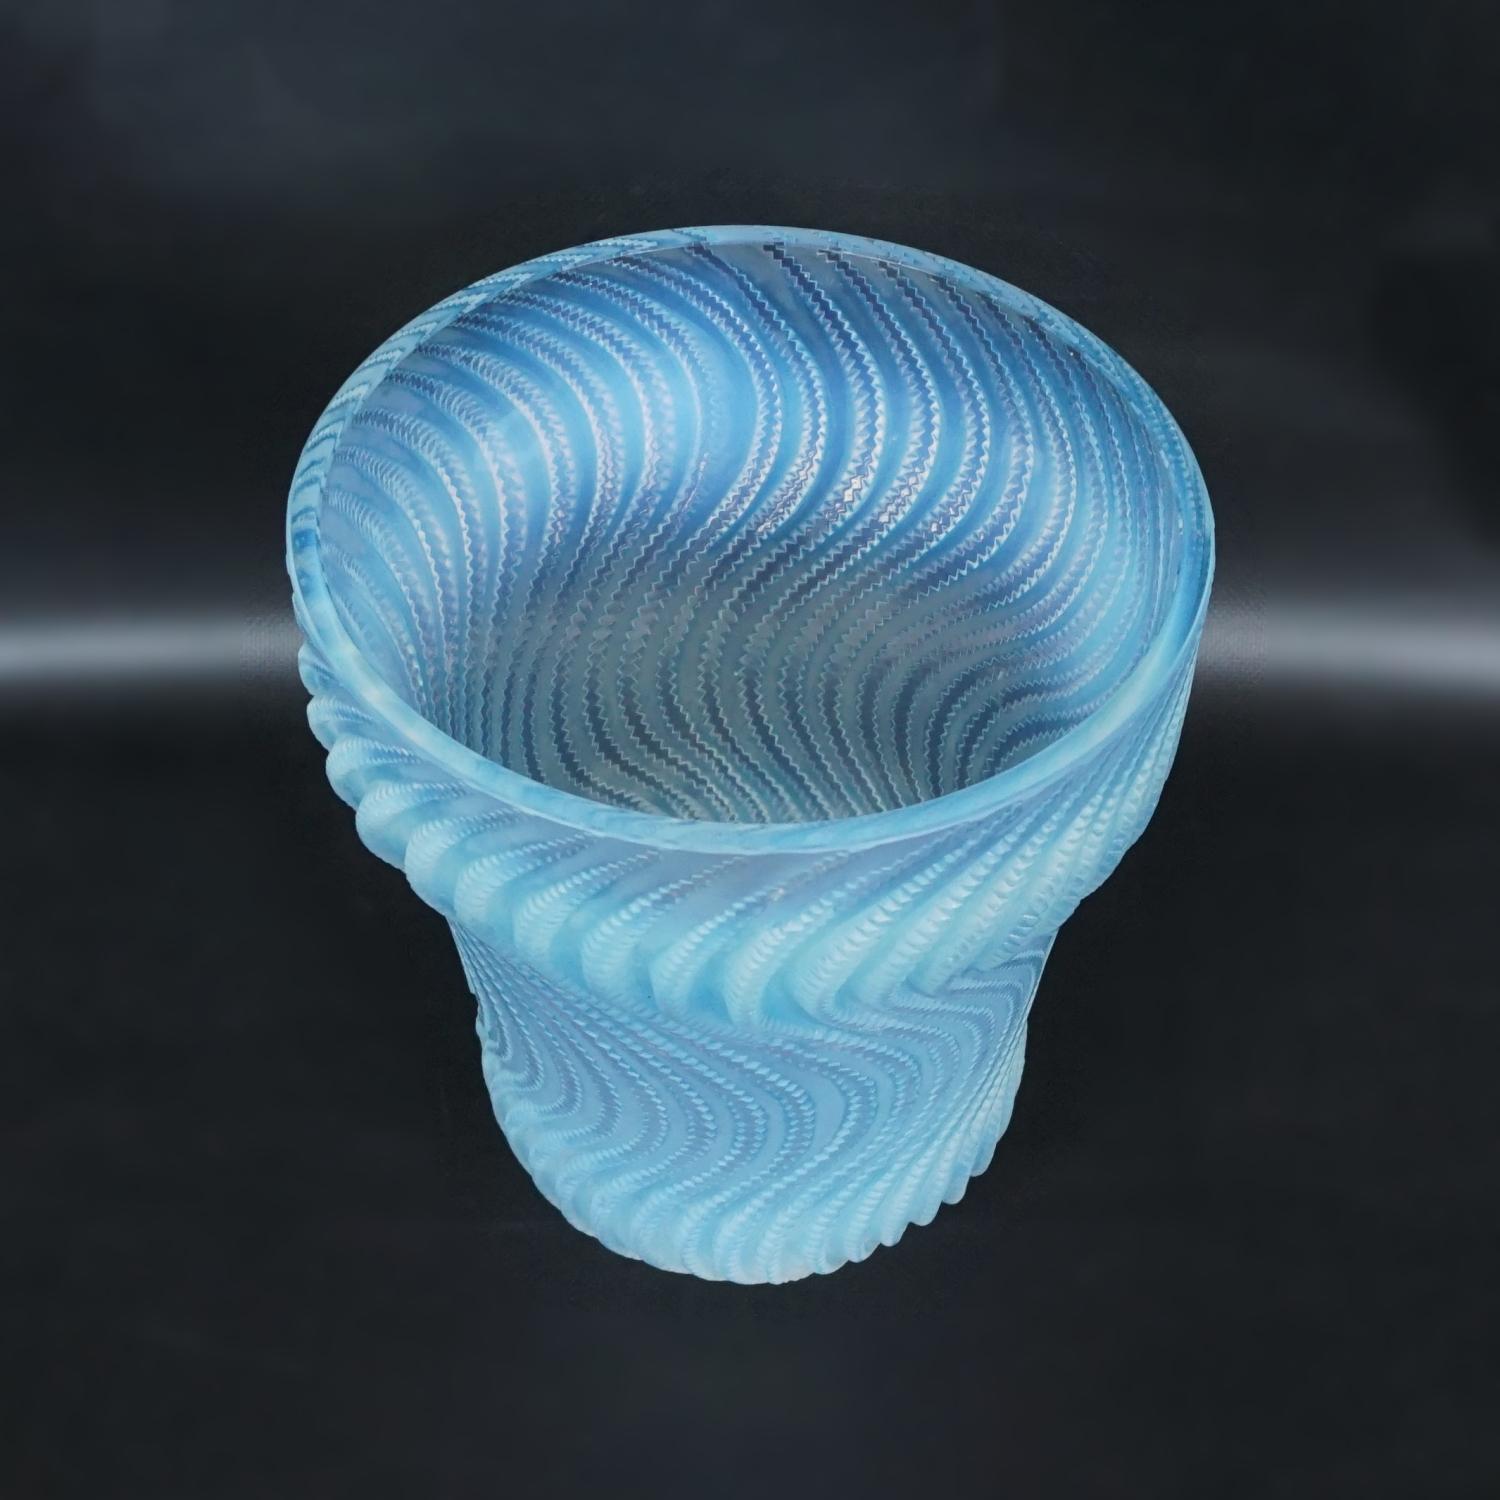 French Art Deco Opalescent Glass Vase 'Actinia' by René Lalique